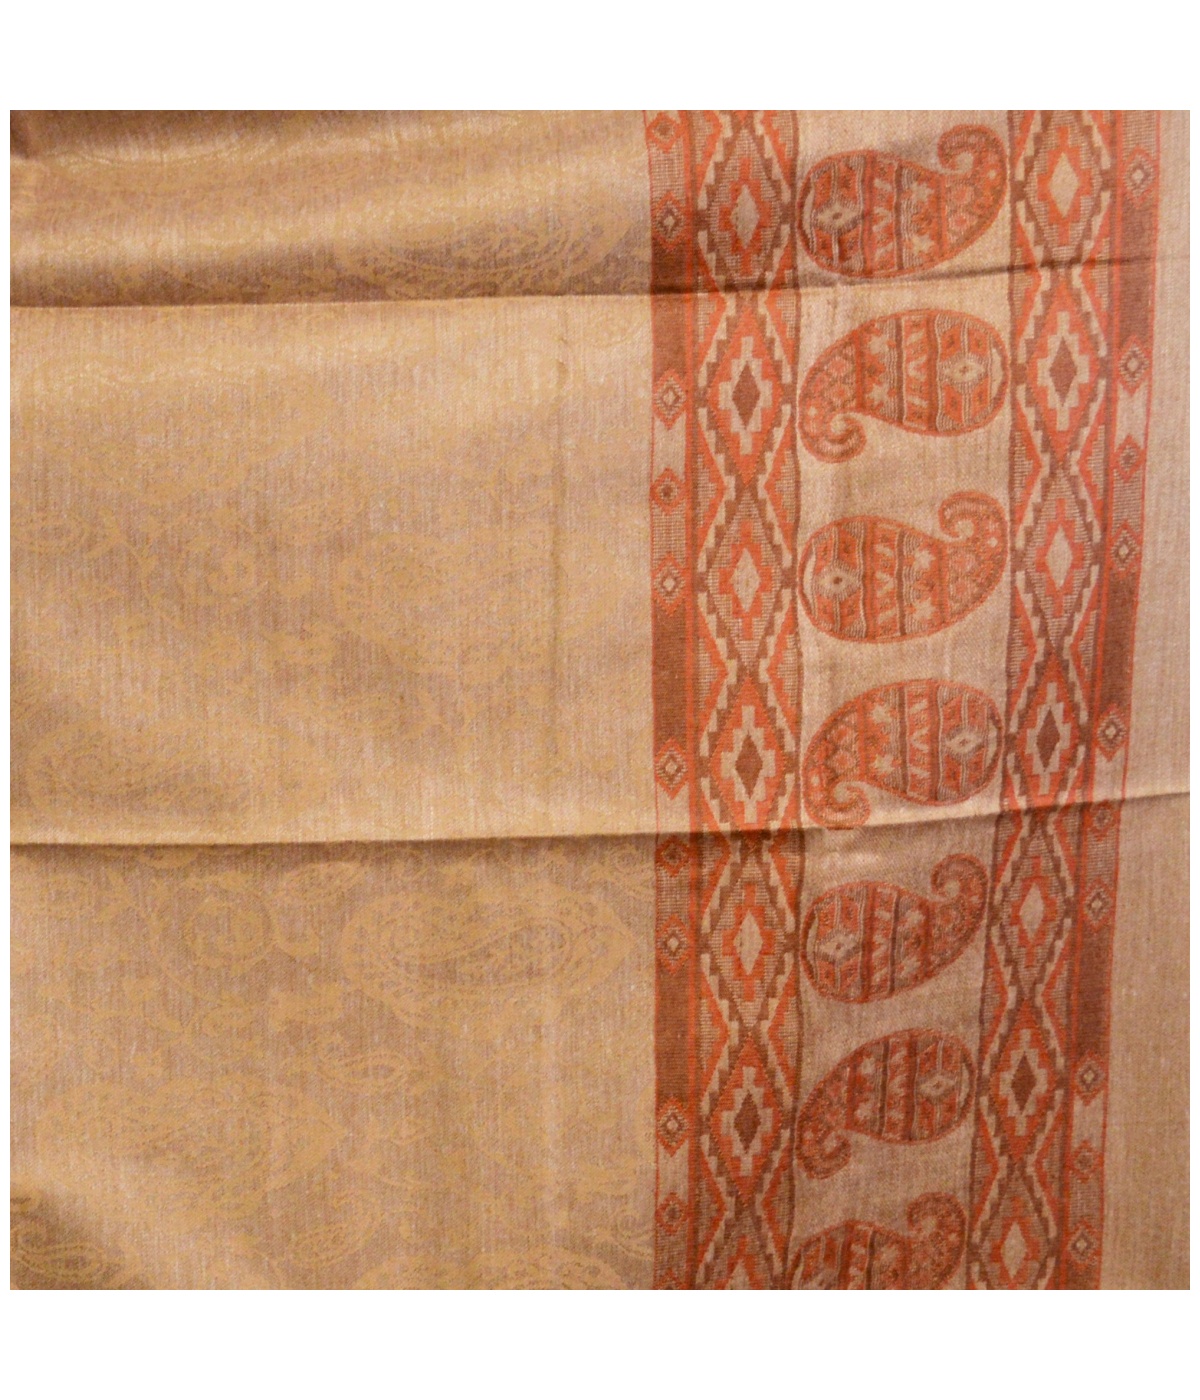 Brown and Terra Cotta Paisley Kashmiri Shawl - General Category